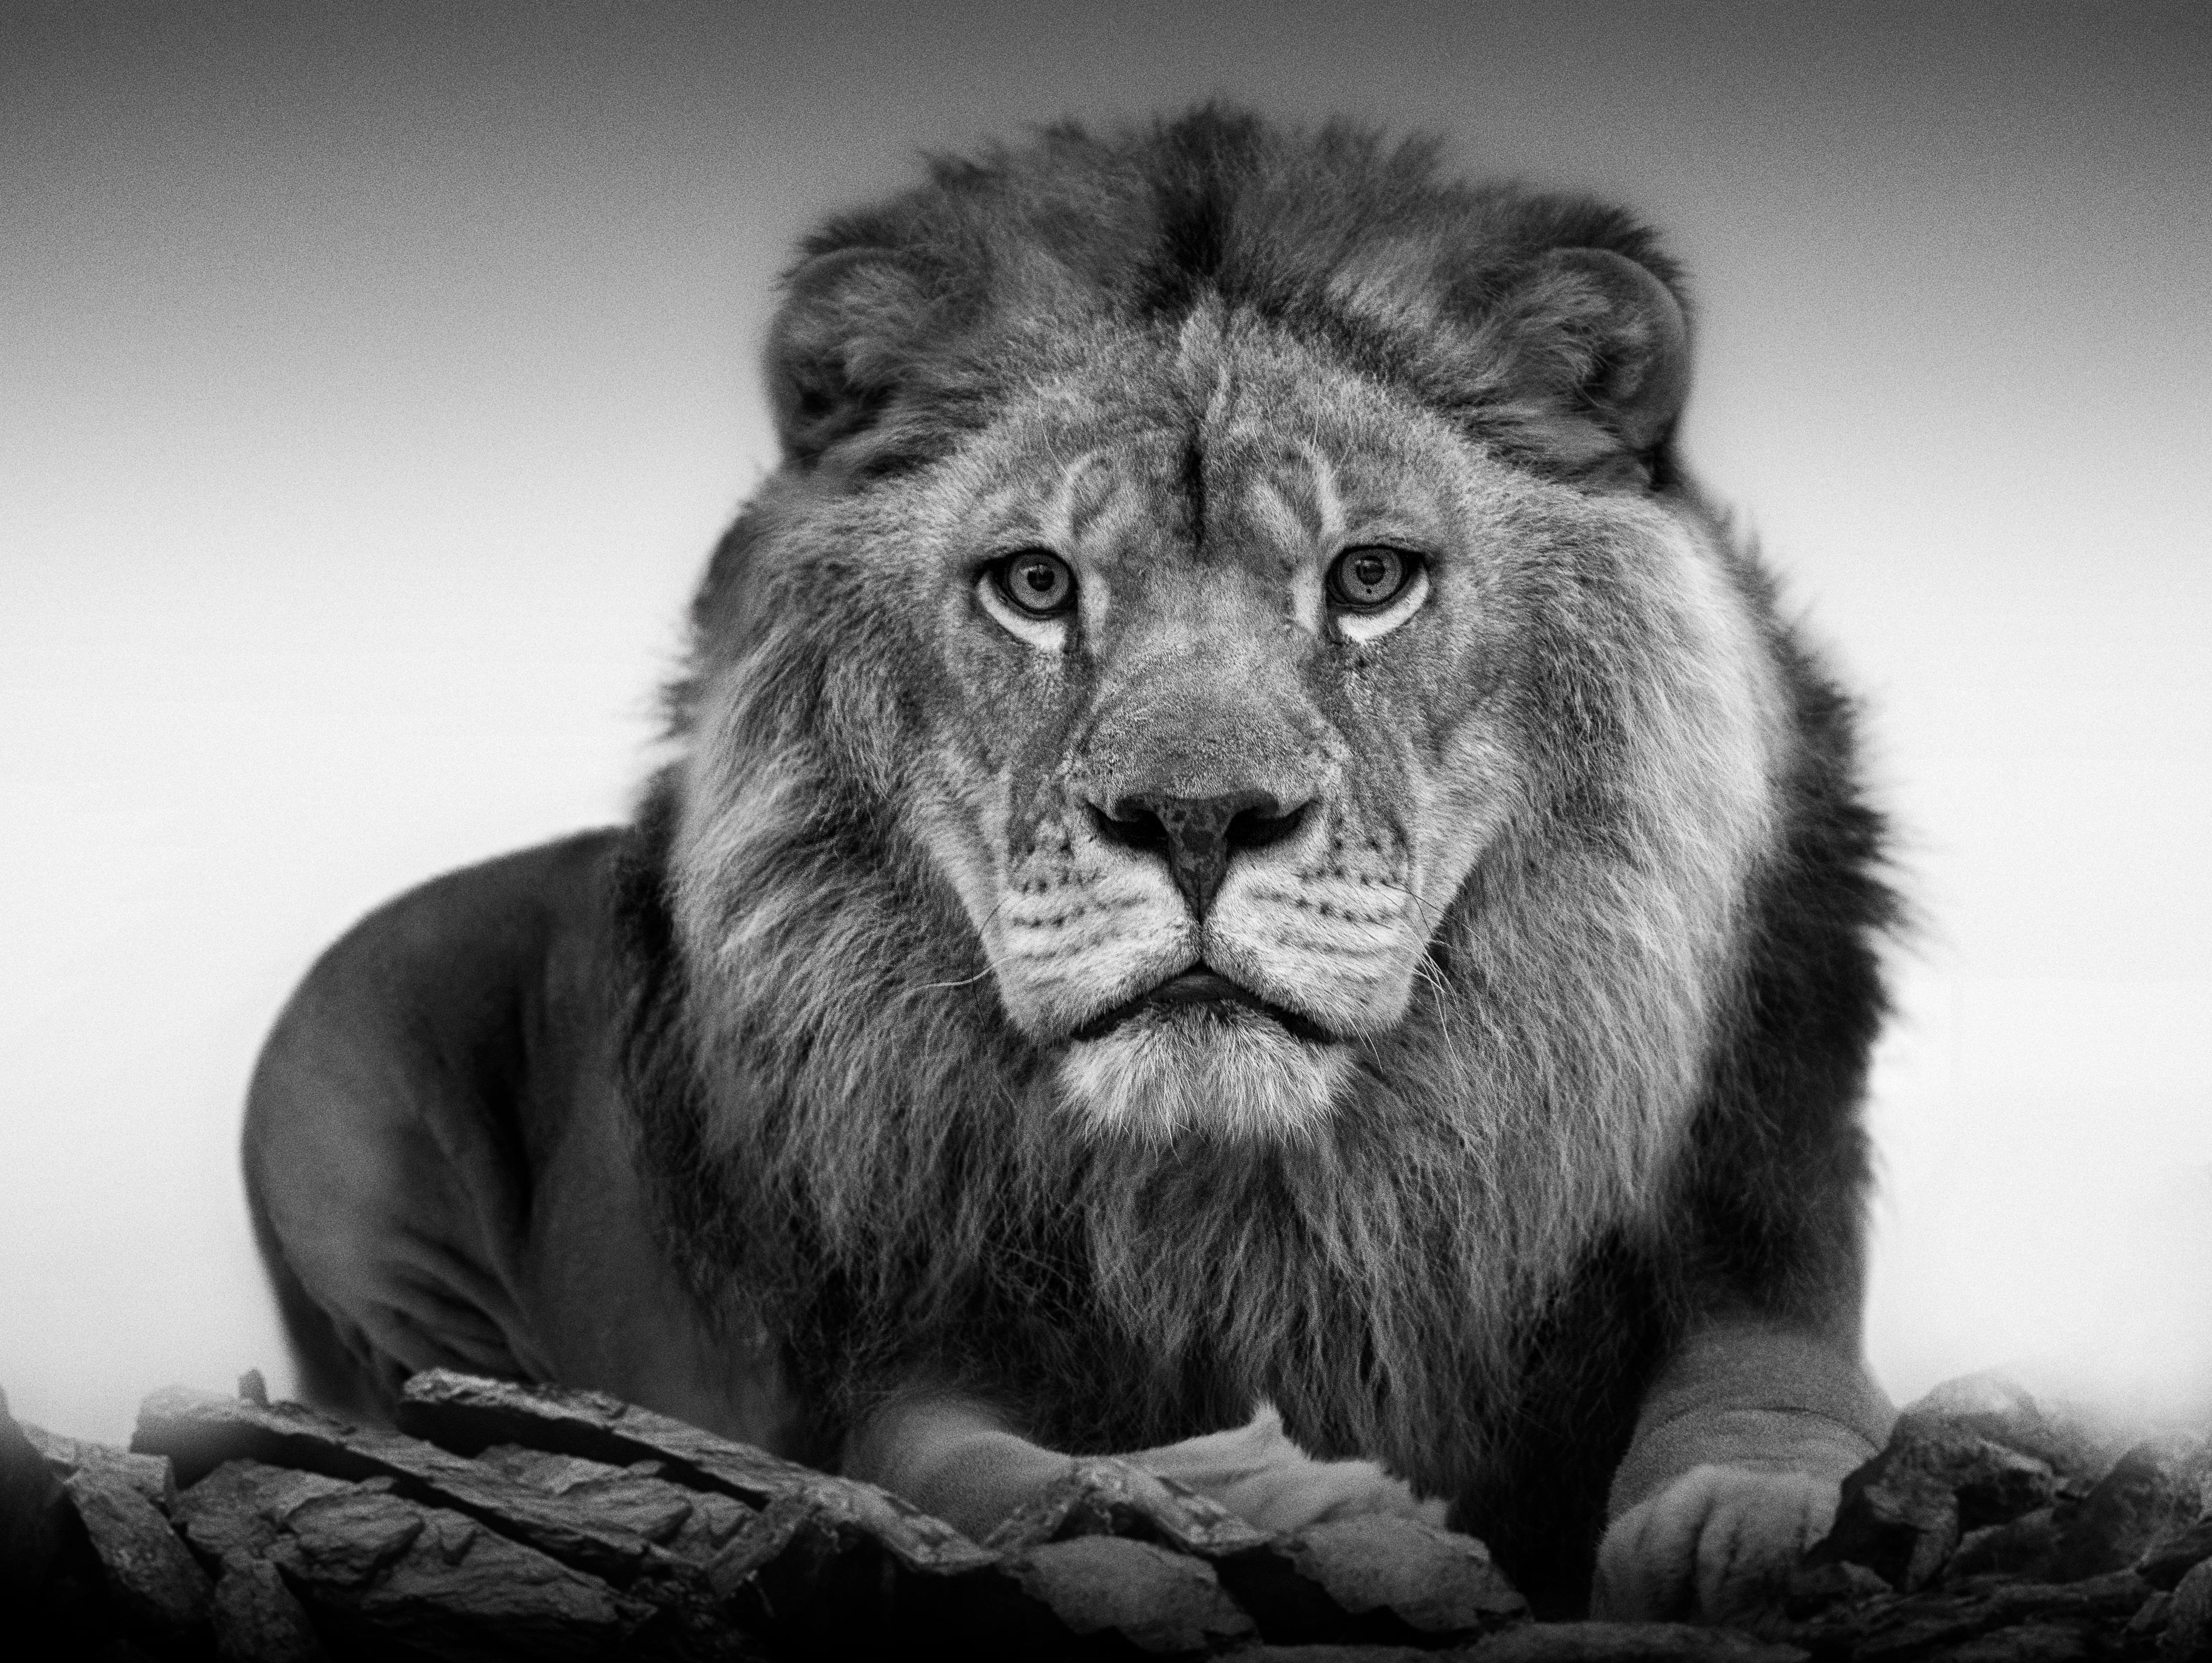 Shane Russeck Black and White Photograph - 36x48  Lion Portrait, Photograph Fine Art Black and White Lion Photography 